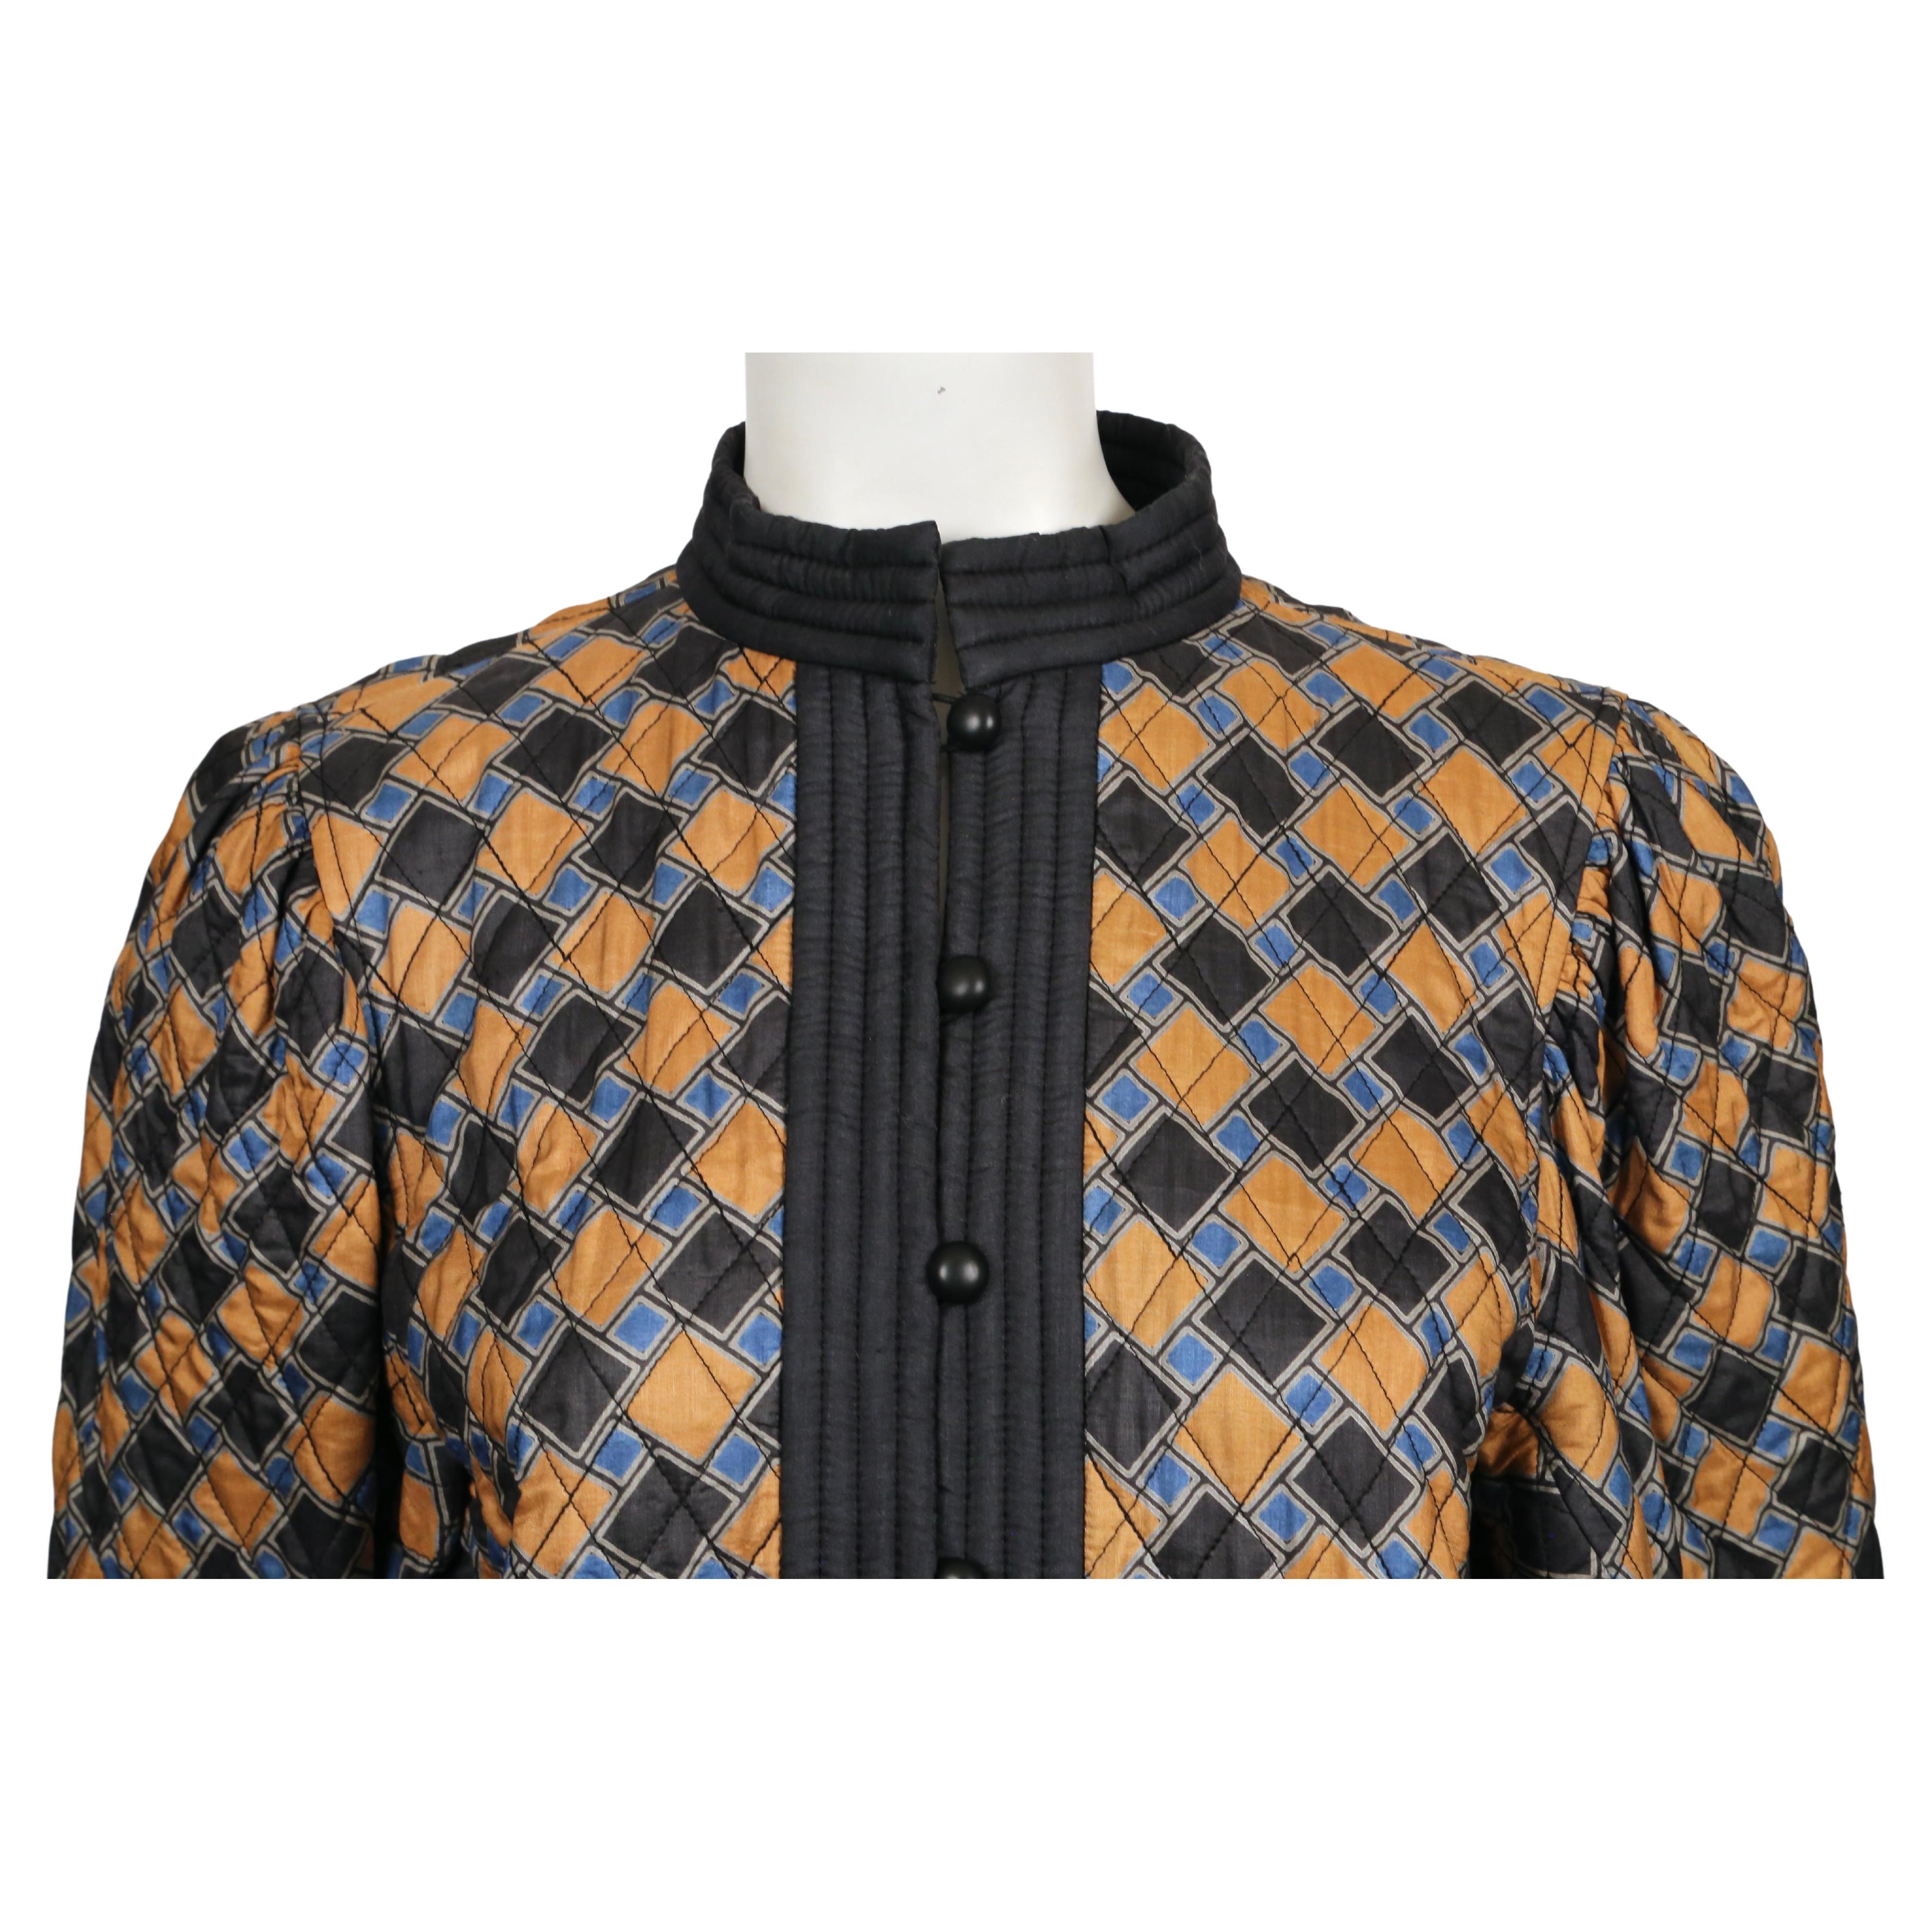 1979 SAINT LAURENT abstract printed silk quilt jacket   For Sale 2